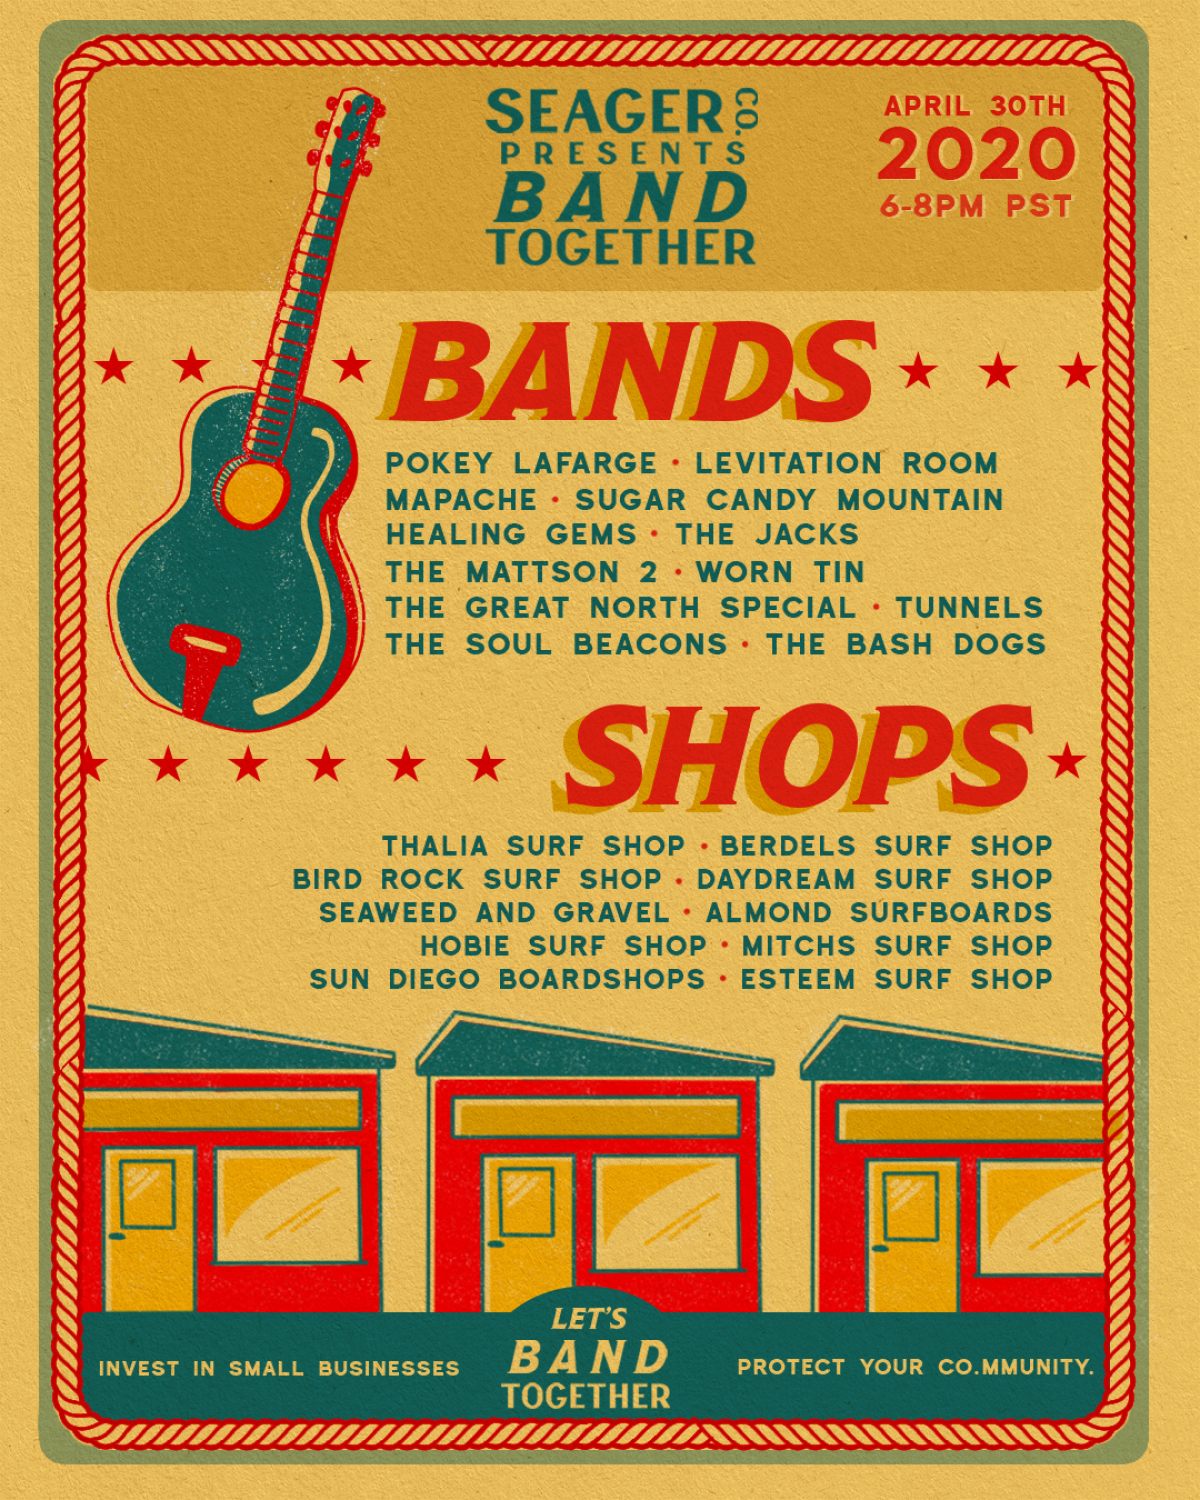 The full lineup of musicians and surf shops participating in "Band Together"